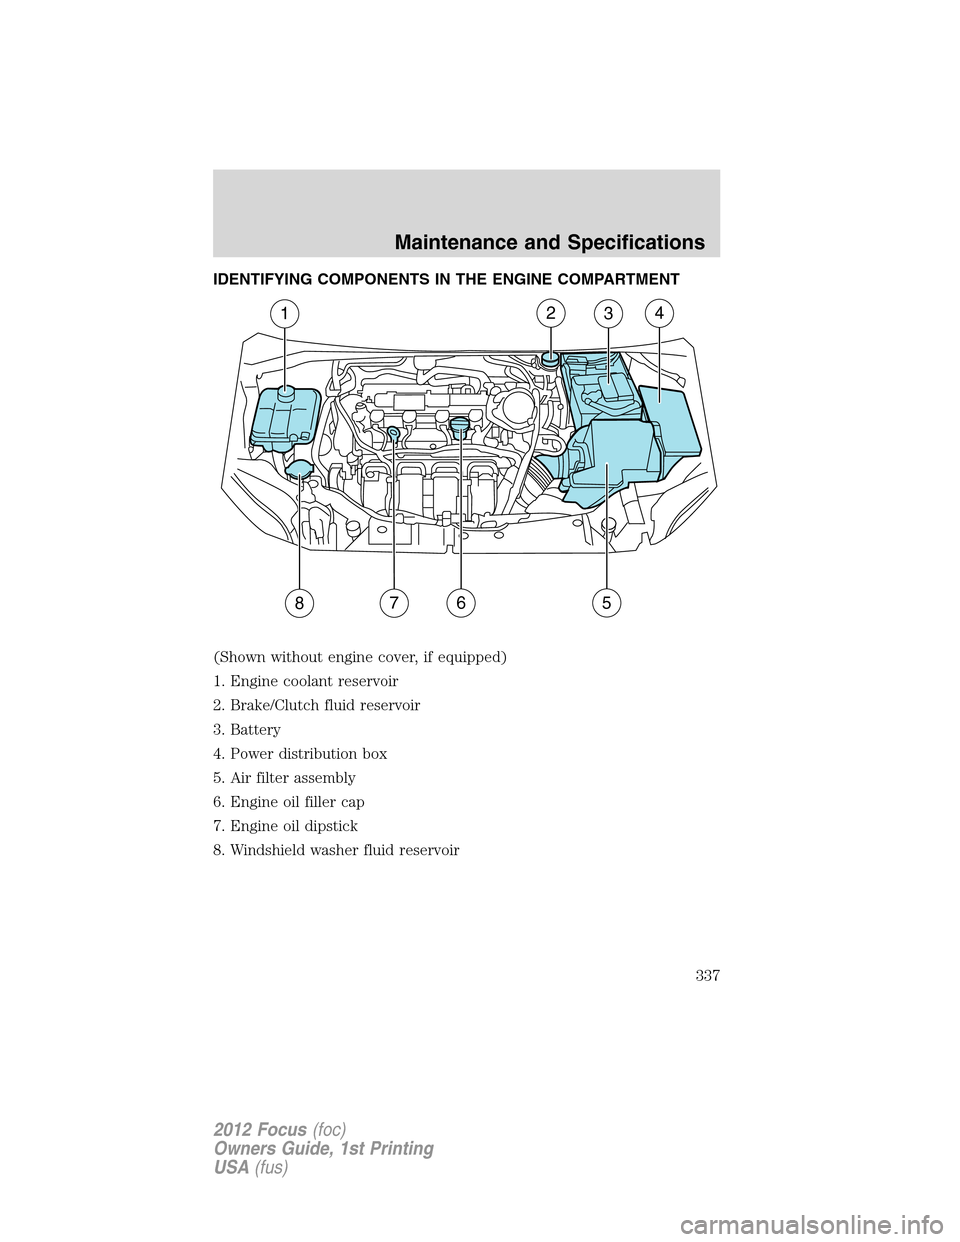 FORD FOCUS 2012 3.G Owners Manual IDENTIFYING COMPONENTS IN THE ENGINE COMPARTMENT
(Shown without engine cover, if equipped)
1. Engine coolant reservoir
2. Brake/Clutch fluid reservoir
3. Battery
4. Power distribution box
5. Air filte